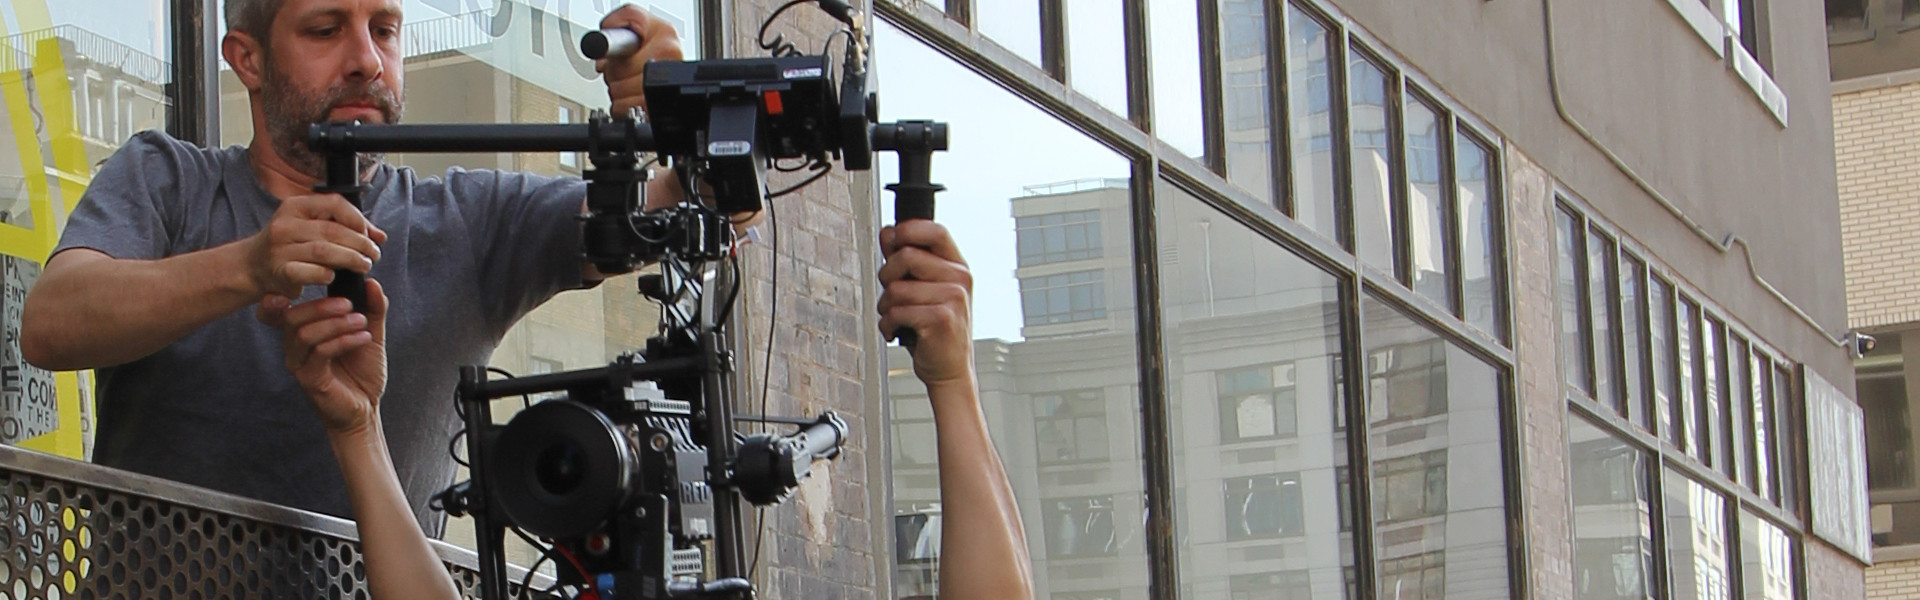 Header image for article AbelCine Offers Freefly Certified Workshops on MoVI Systems